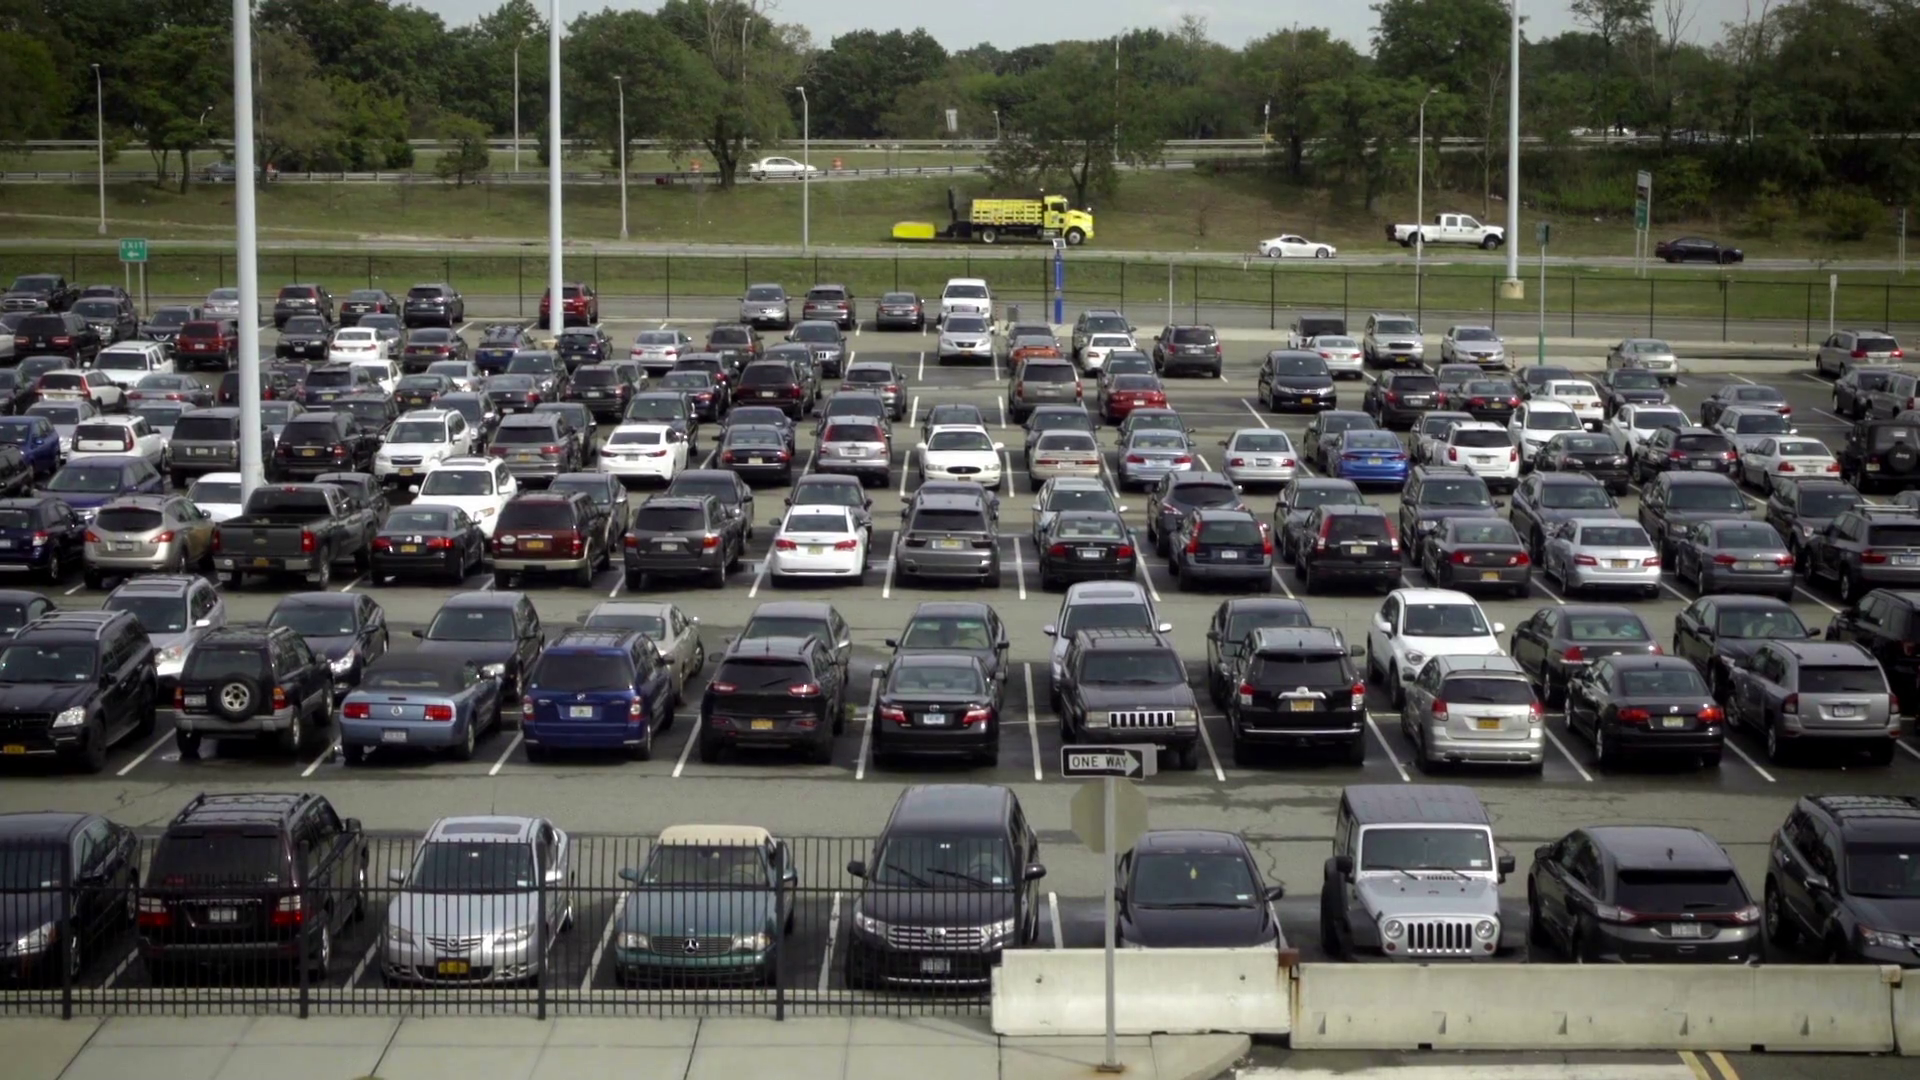 Outdoor Parking Lot Filled With Parked Cars Outside Stock Video Footage   Videoblocks - Parking Lot, Transparent background PNG HD thumbnail